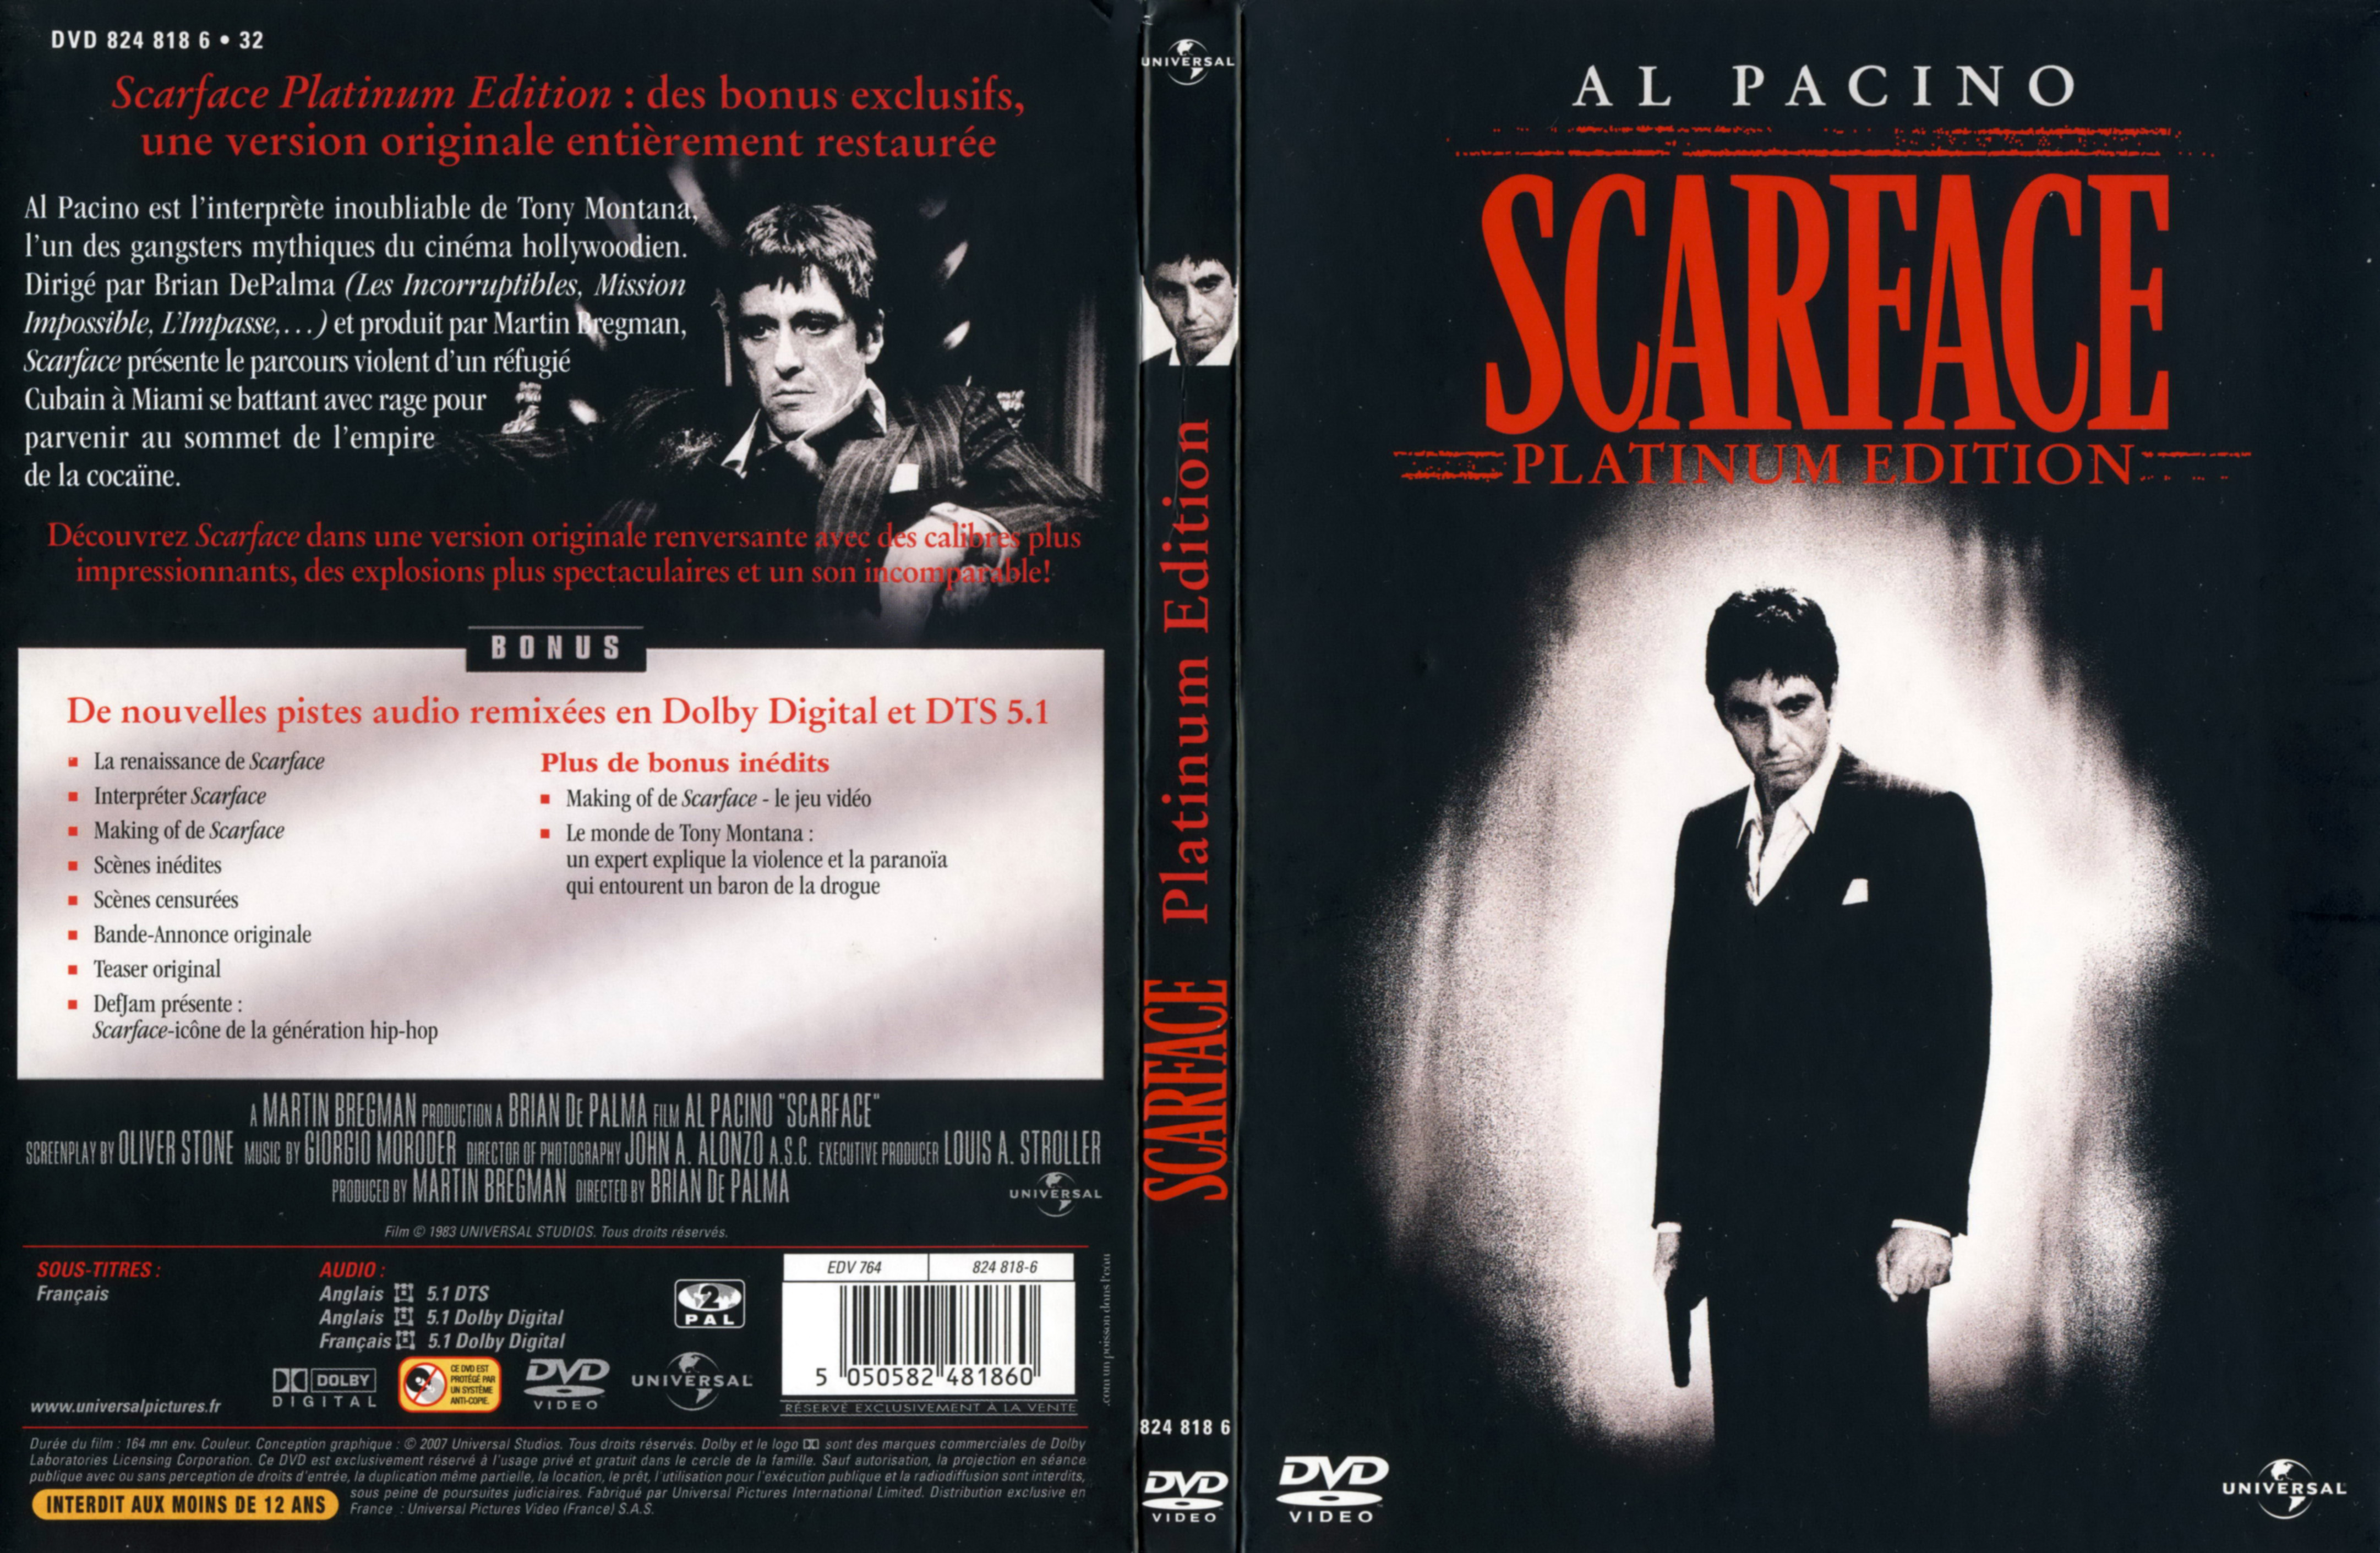 Jaquette DVD Scarface v4